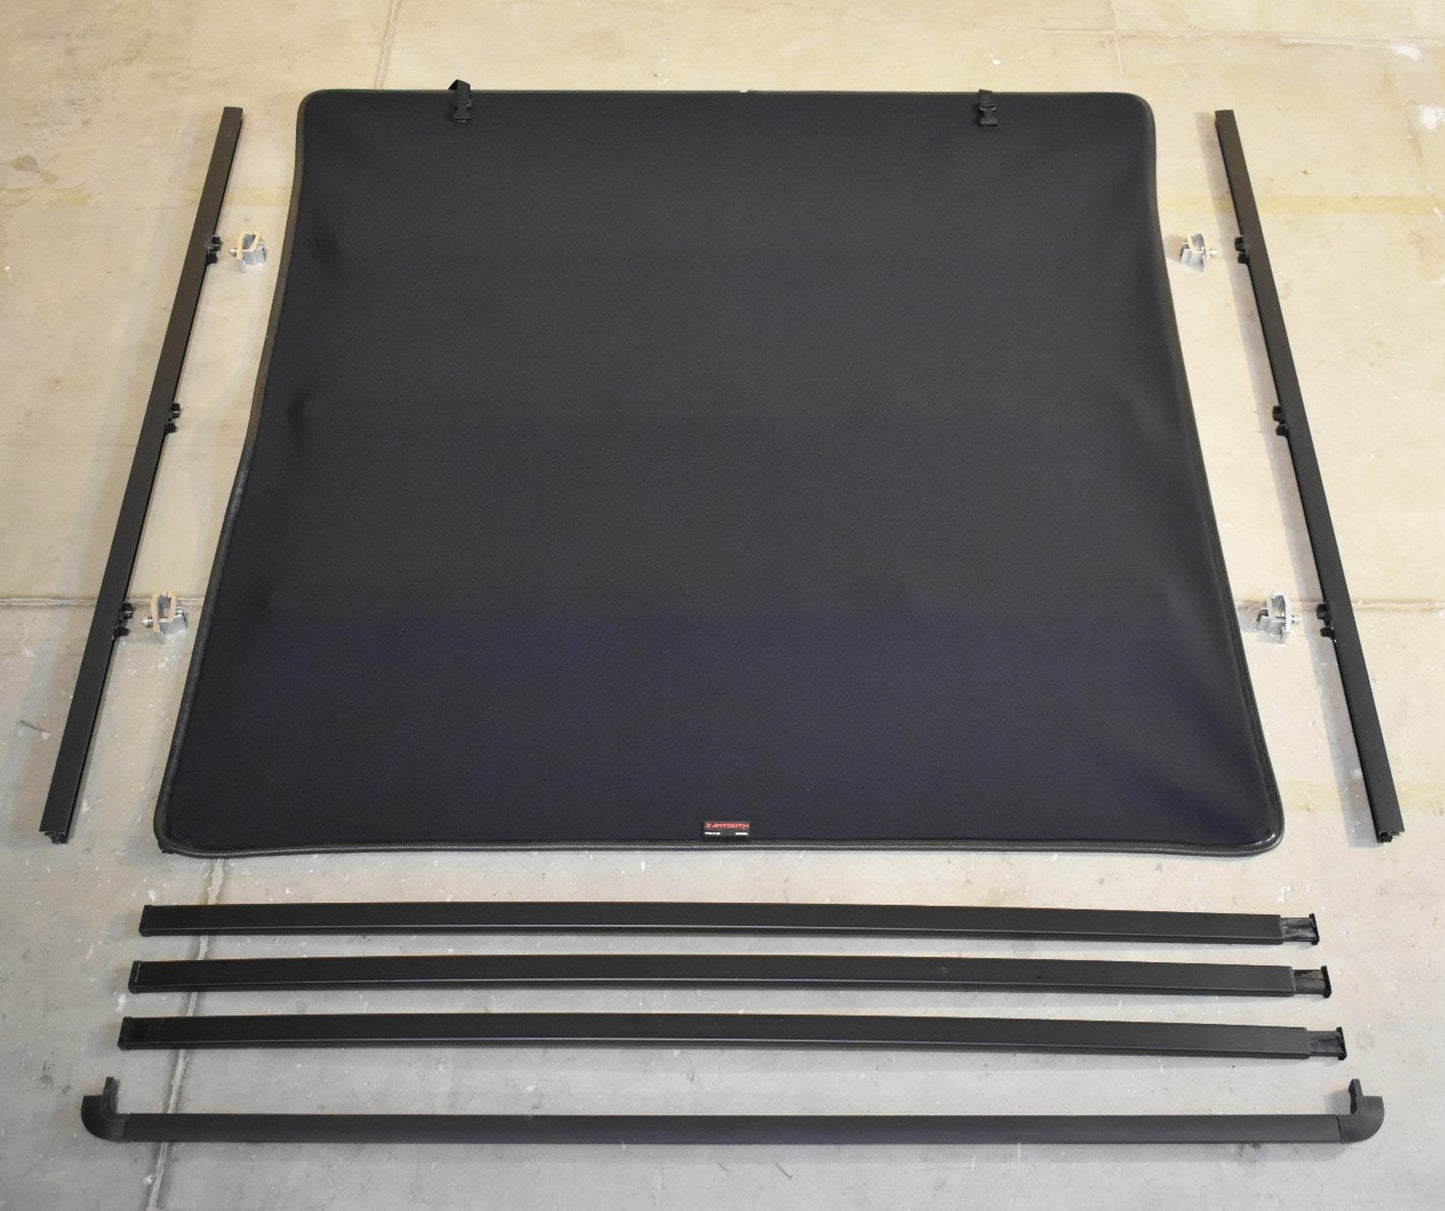 Ram 3500 Sawtooth expandable pickup truck bed components